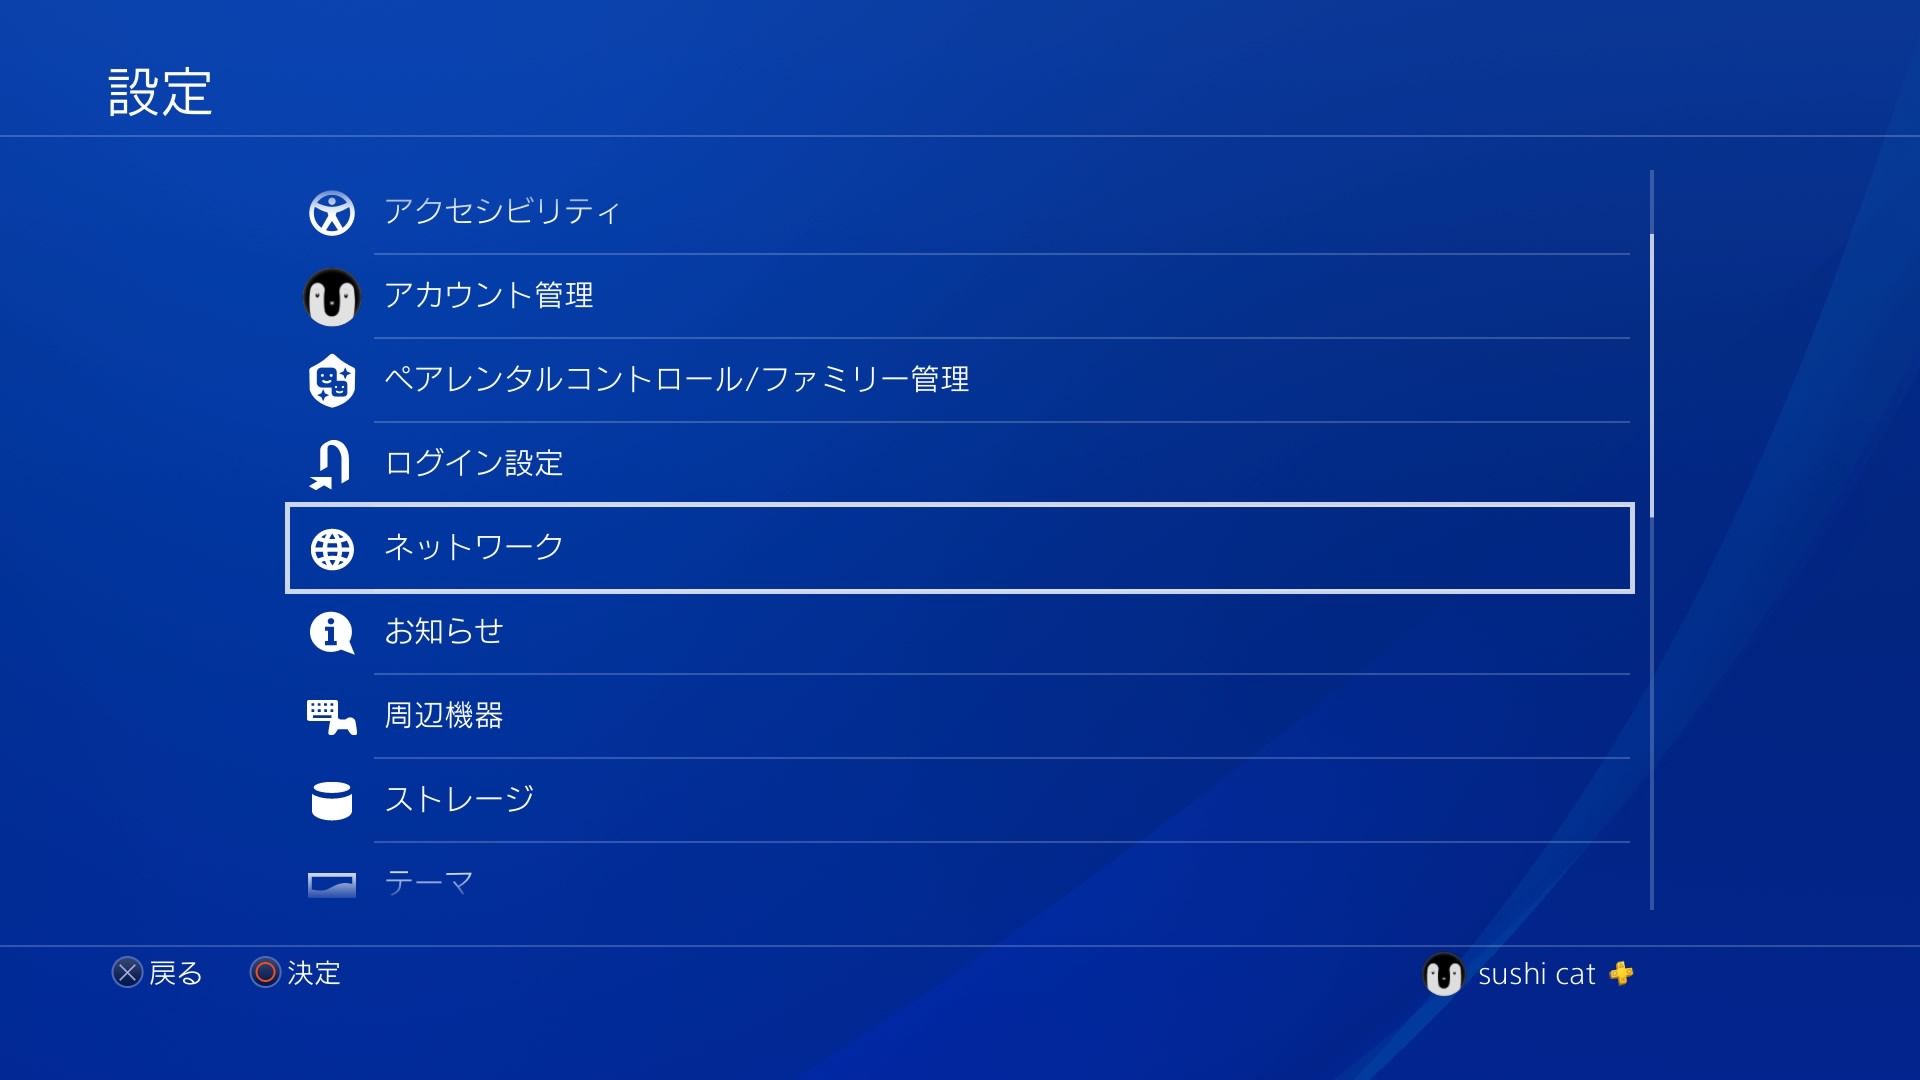 Ps4 ミラティブ 配信